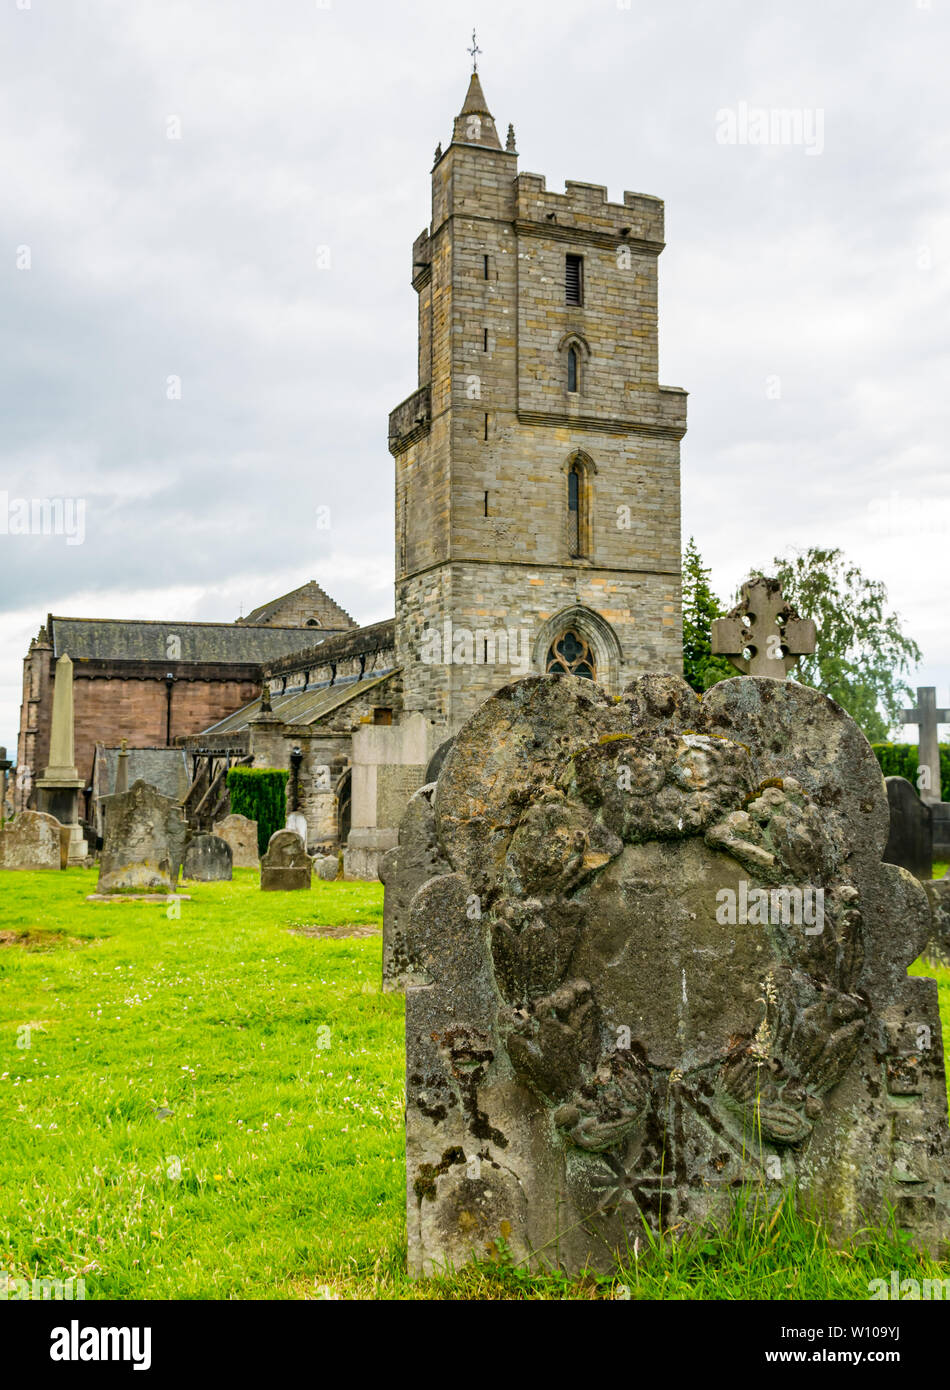 Church of the Holy Rude graveyard with old gravestones, Stirling, Scotland, UK Stock Photo